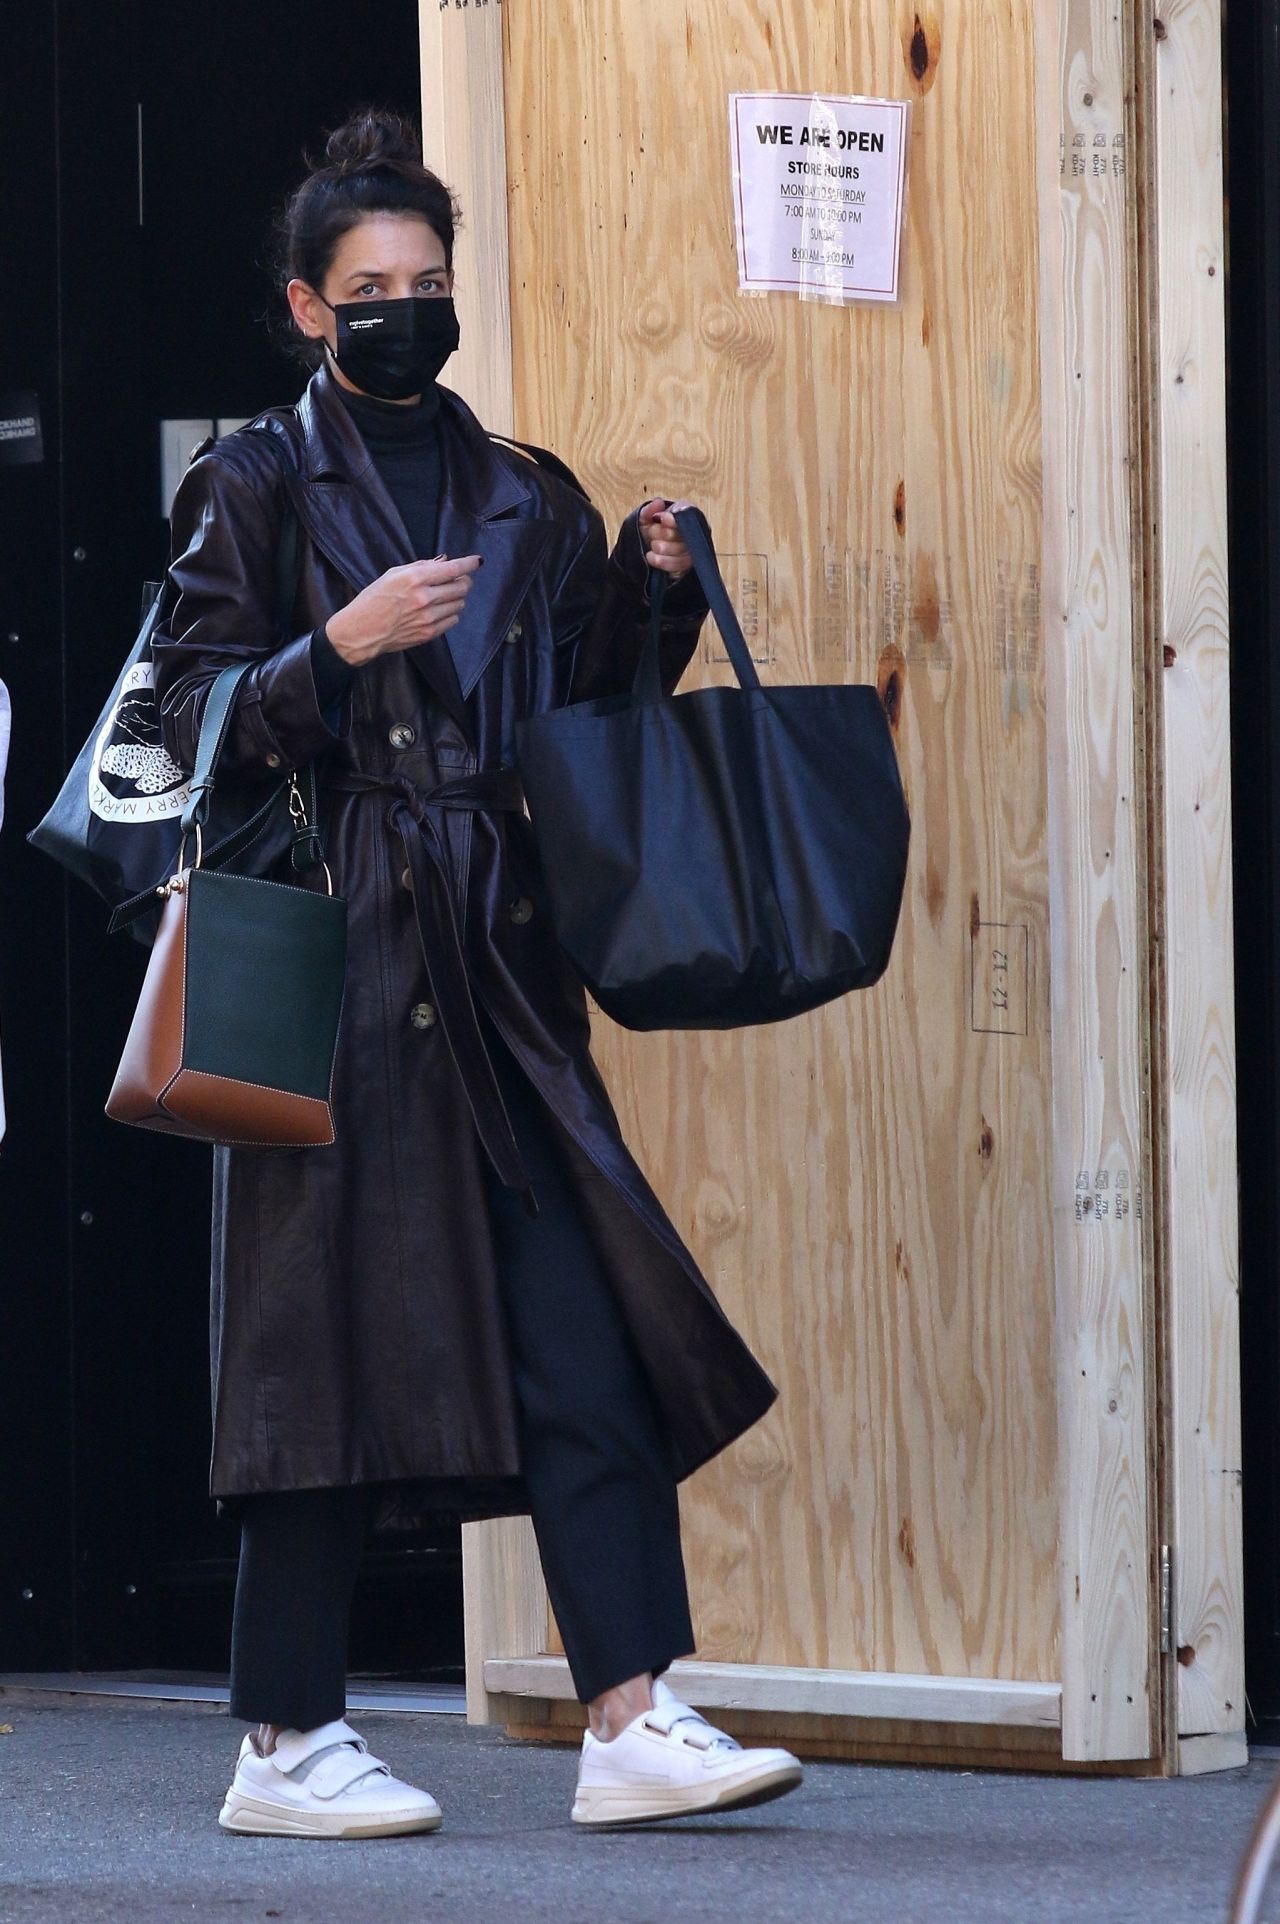 katie-holmes-in-a-brown-leather-trench-coat-in-nyc-11-04-2020-3.jpg